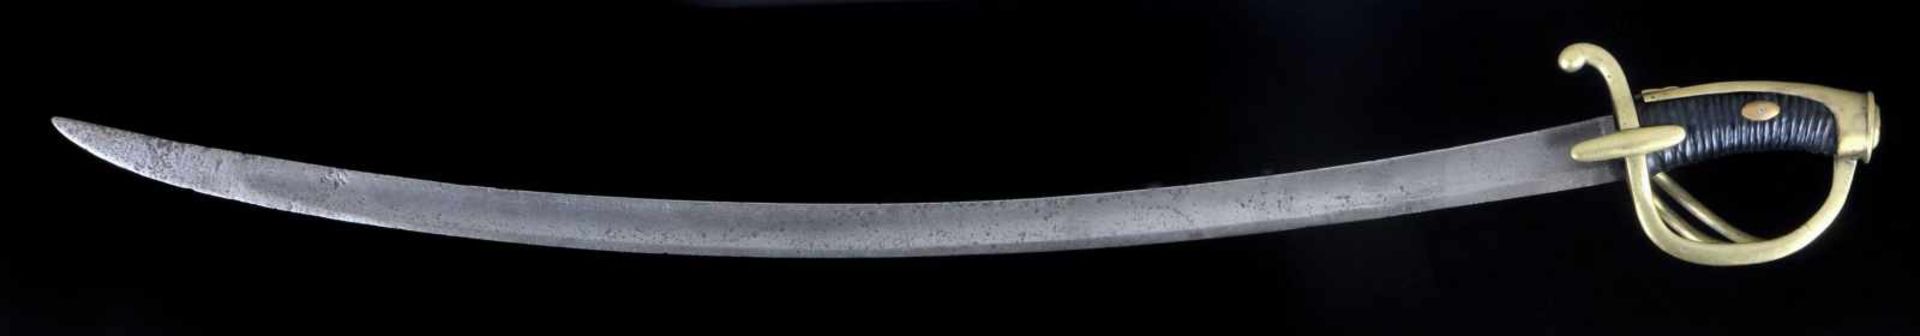 A FRENCH AN XI LIGHT CAVALRY TROOPER'S SWORD, NAPOLEON ARMY. FRANCE, EARLY 19TH CENTURY, EMPIRE - Bild 12 aus 17